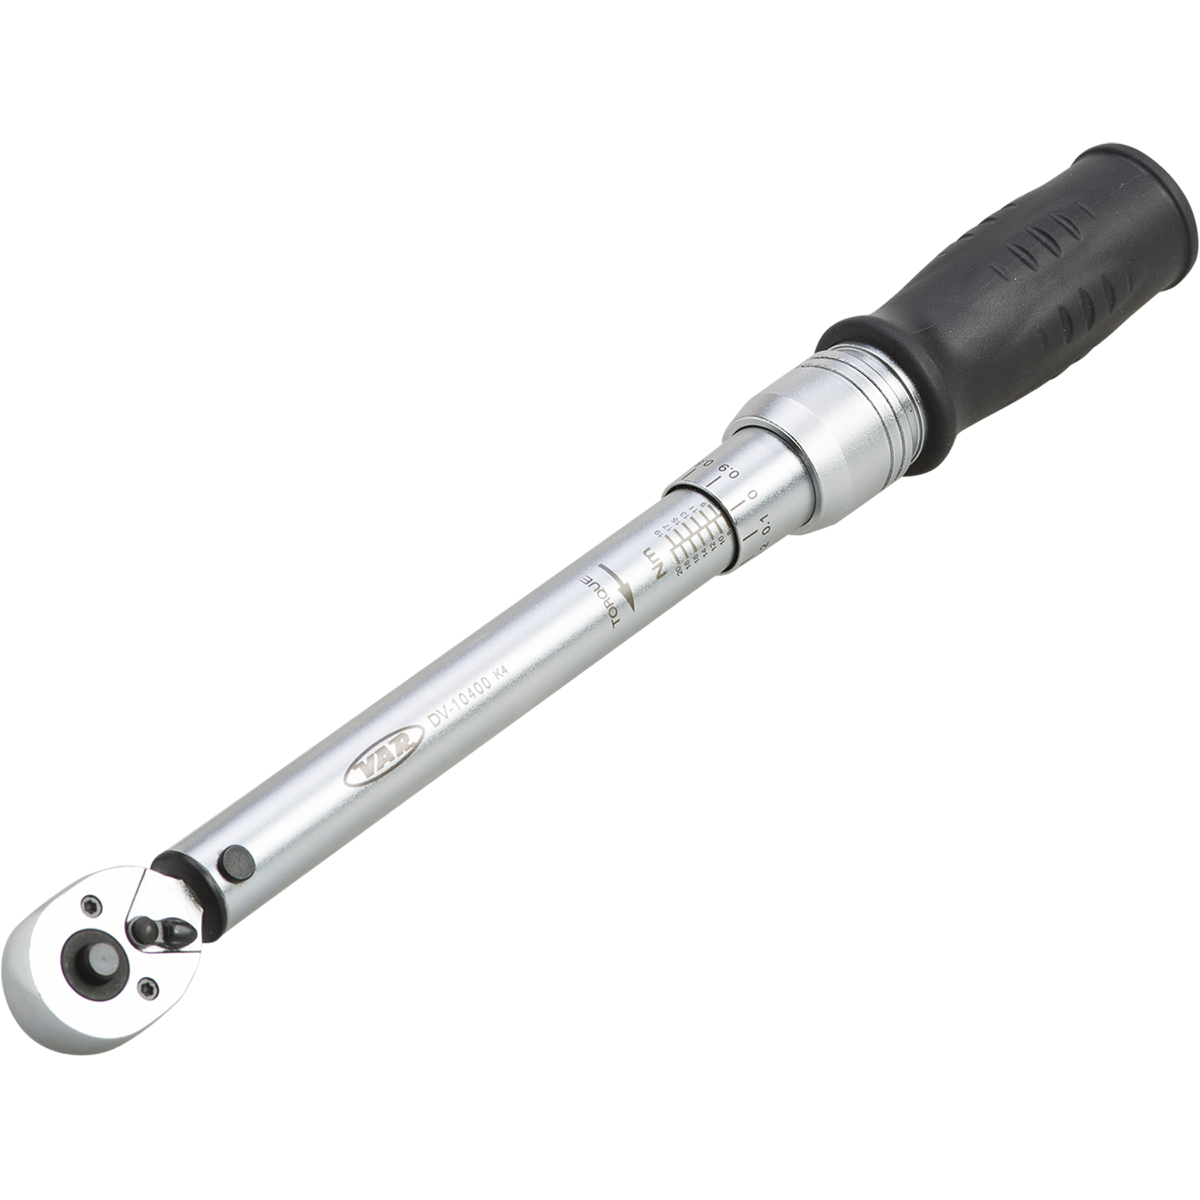 4-20NM torque wrench with 3/8" drive